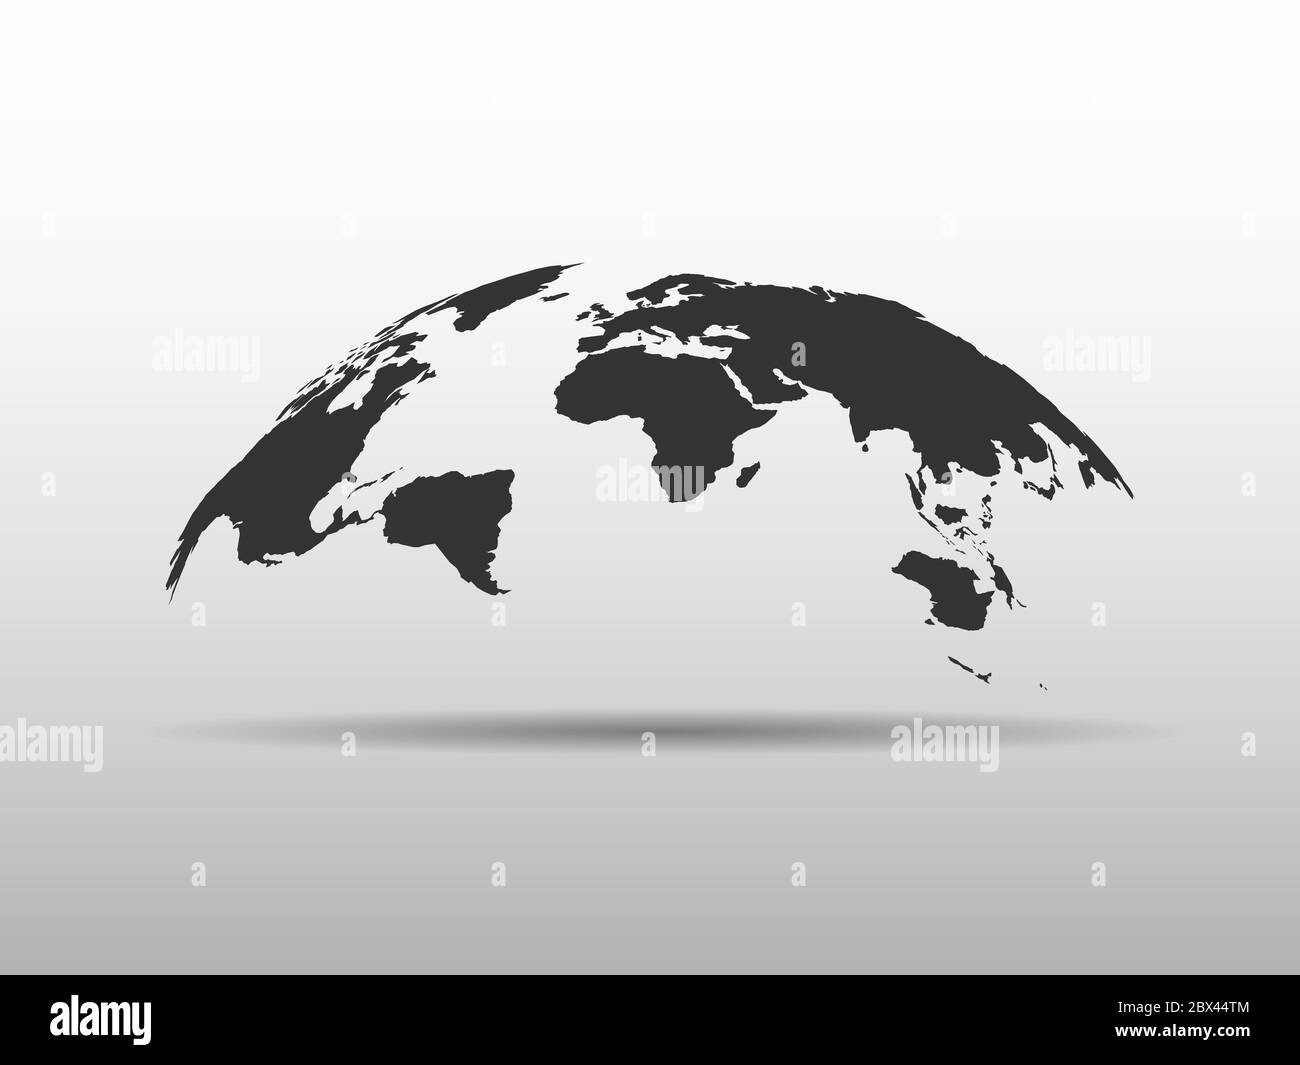 World map bulging in a shape of globe. Abstract design 3D map with dropped shadow. Stock Vector